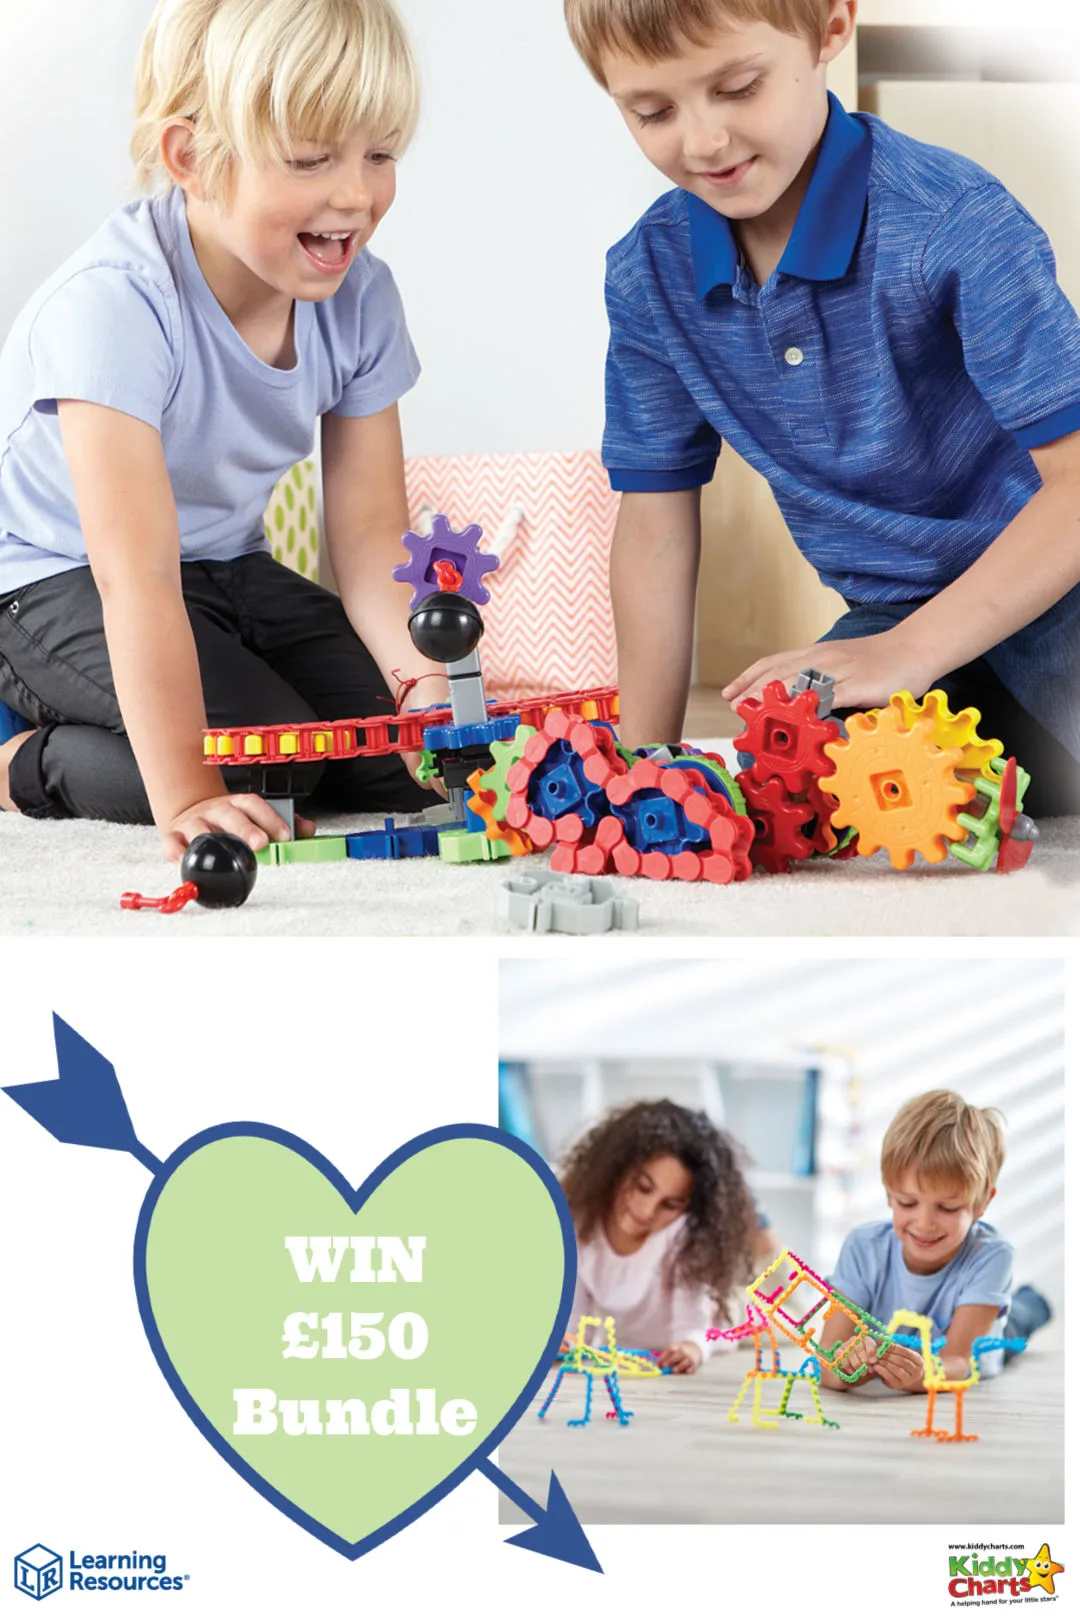 Win an amazing £150 bundle of toys #win #giveaways #toys